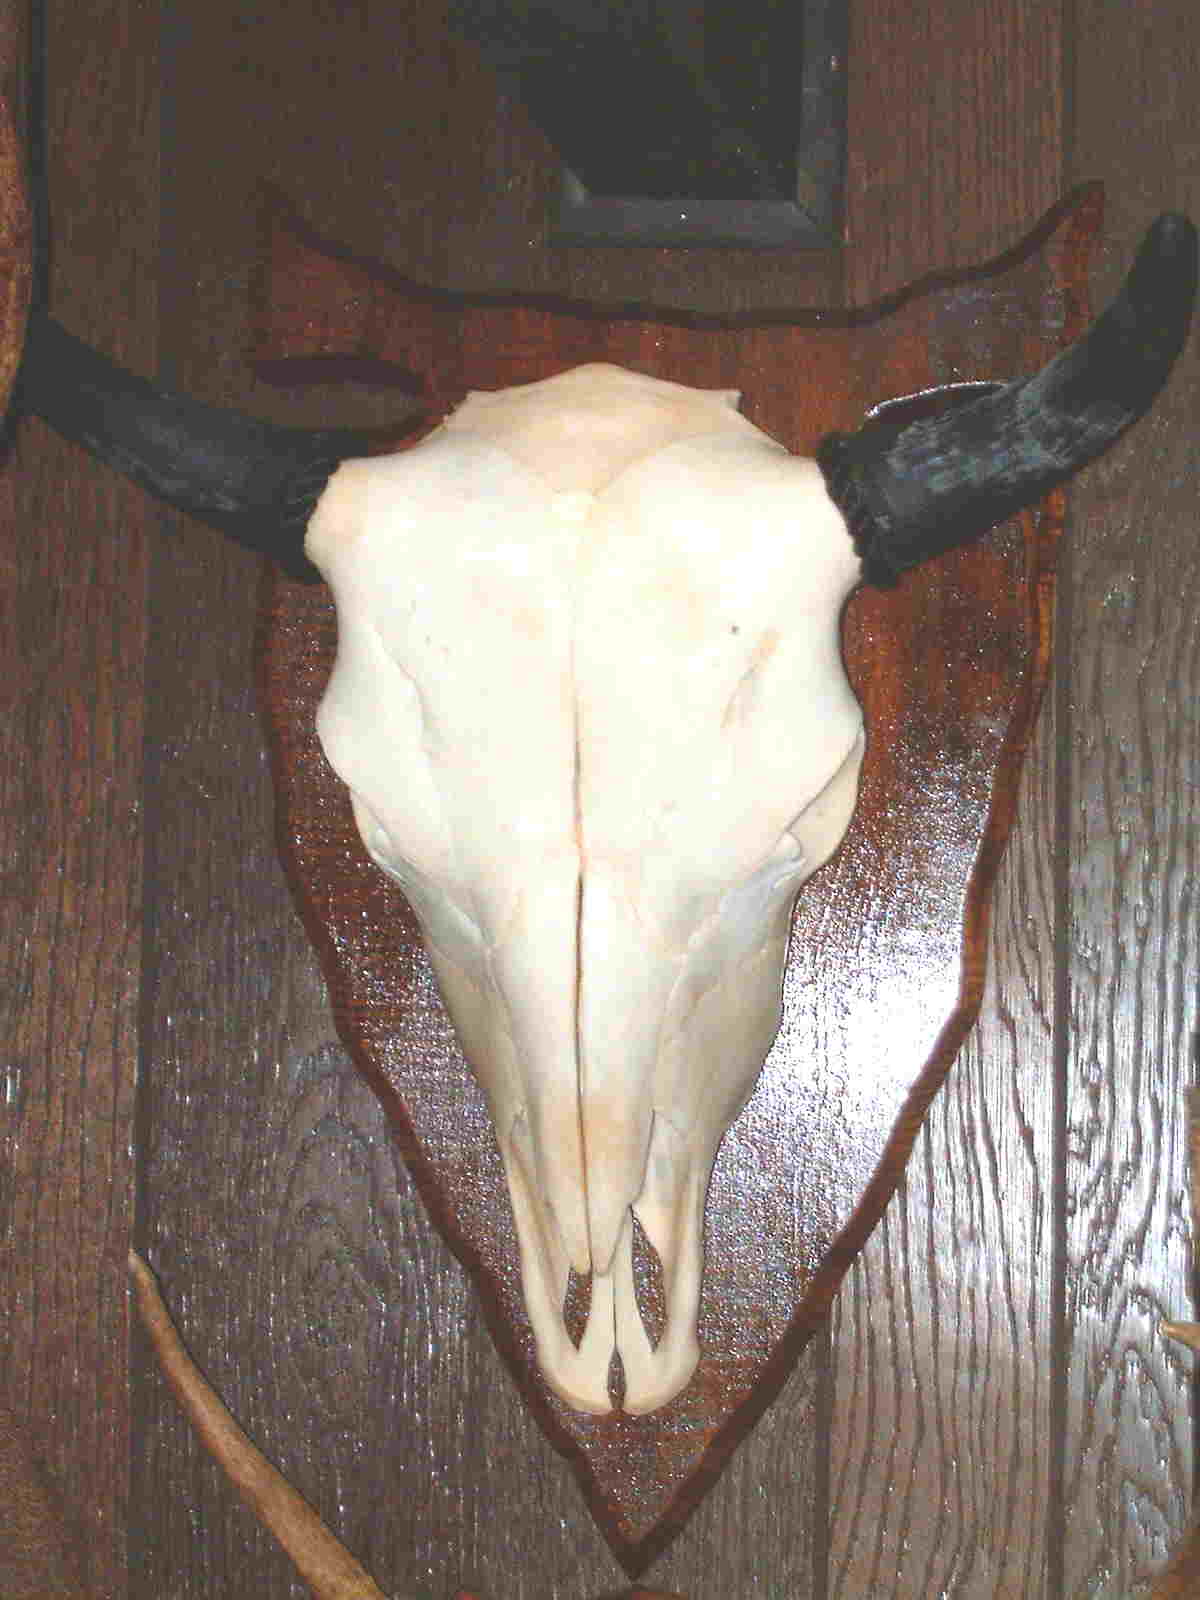 This is a picture of a typical bleached skull